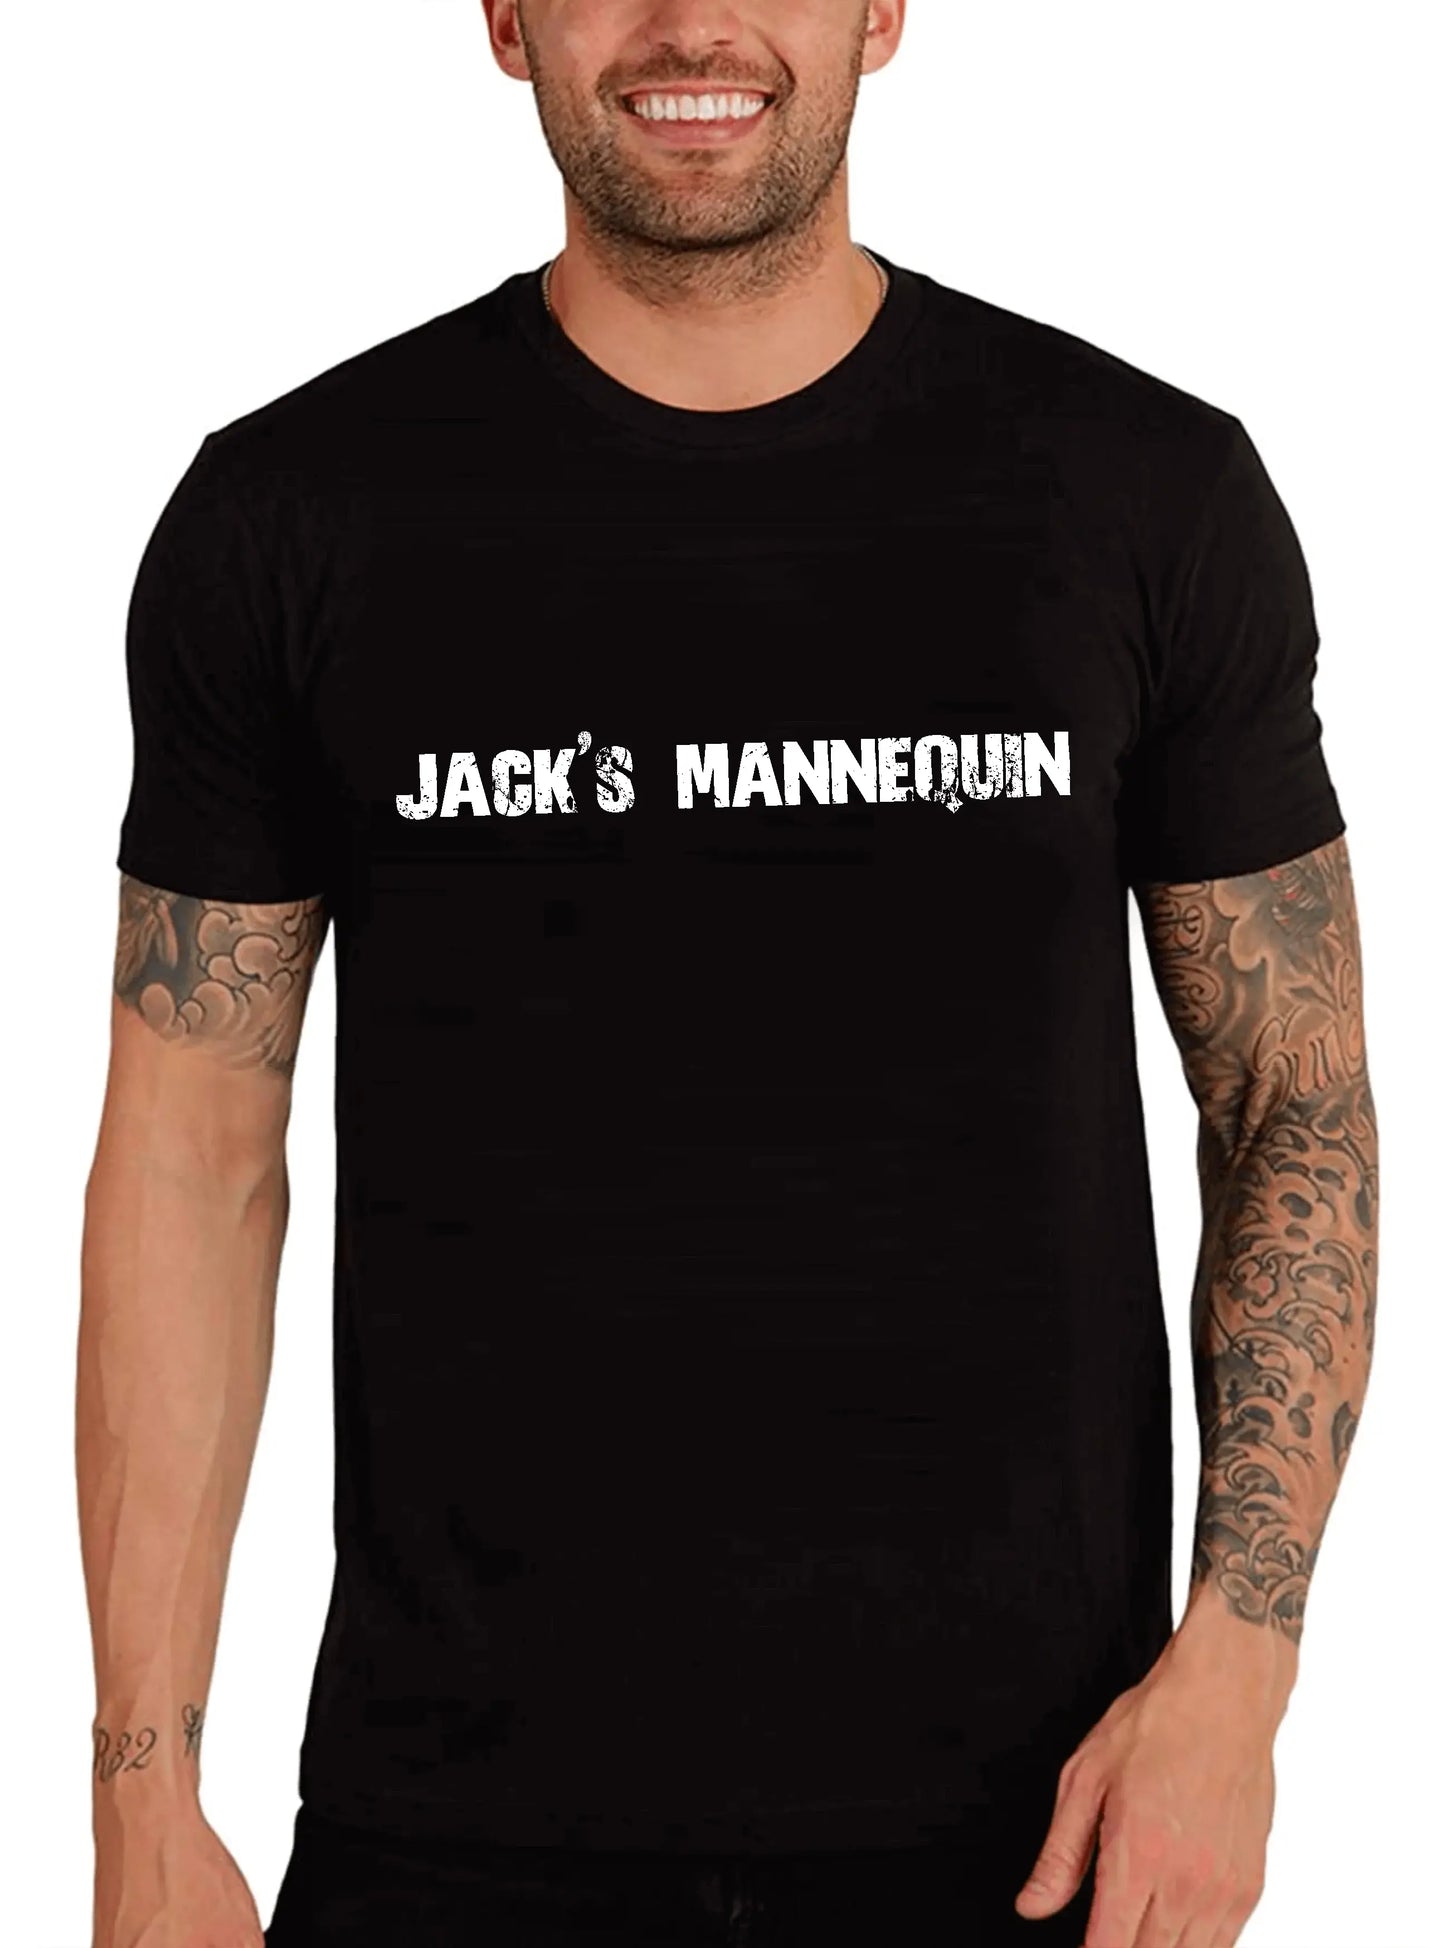 Men's Graphic T-Shirt Jack's Mannequin Eco-Friendly Limited Edition Short Sleeve Tee-Shirt Vintage Birthday Gift Novelty